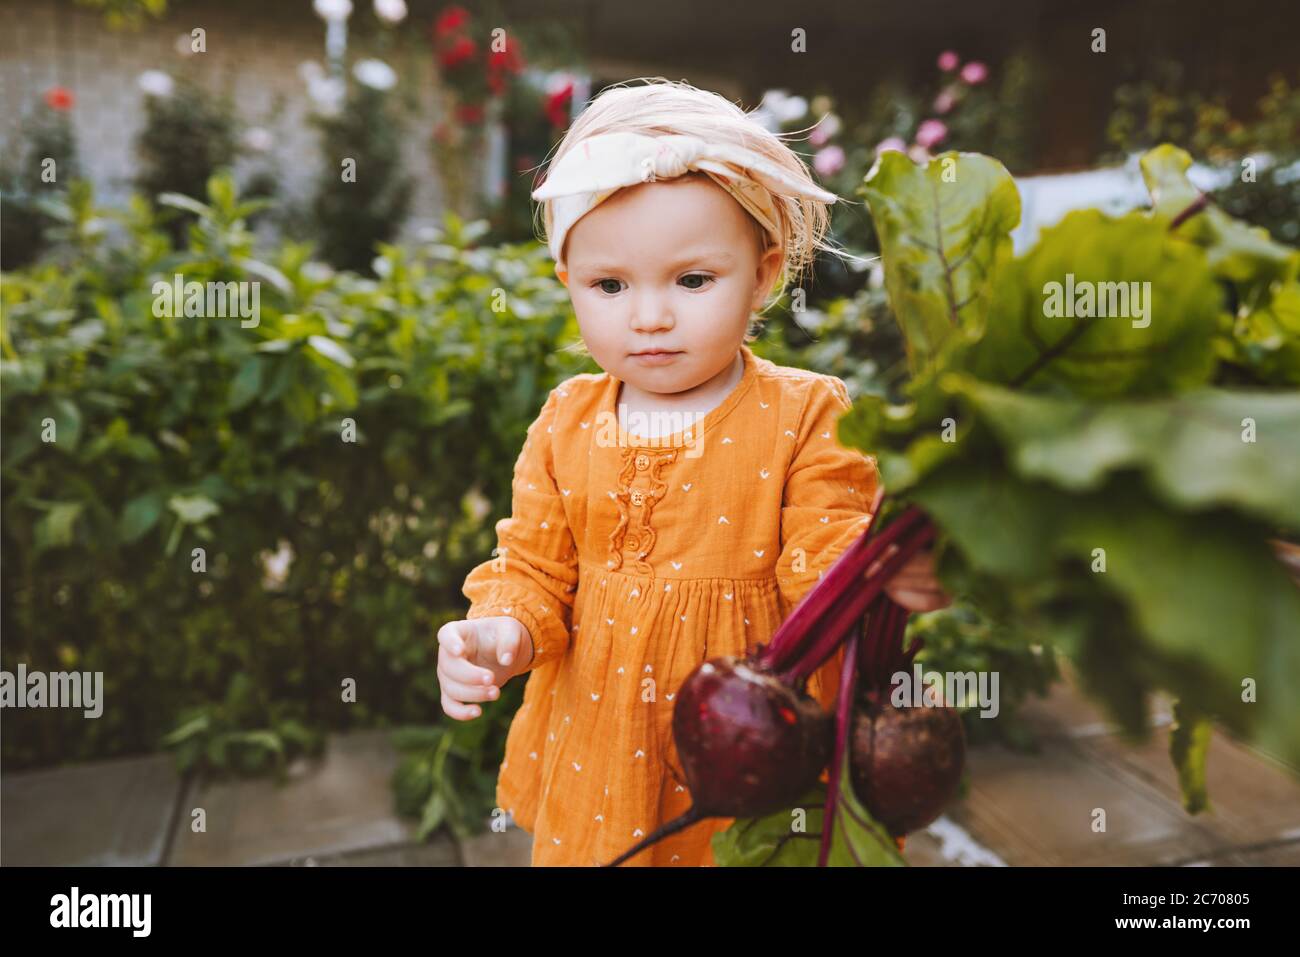 Child with beetroot in garden healthy food lifestyle vegan organic vegetables homegrown local farming agriculture concept Stock Photo